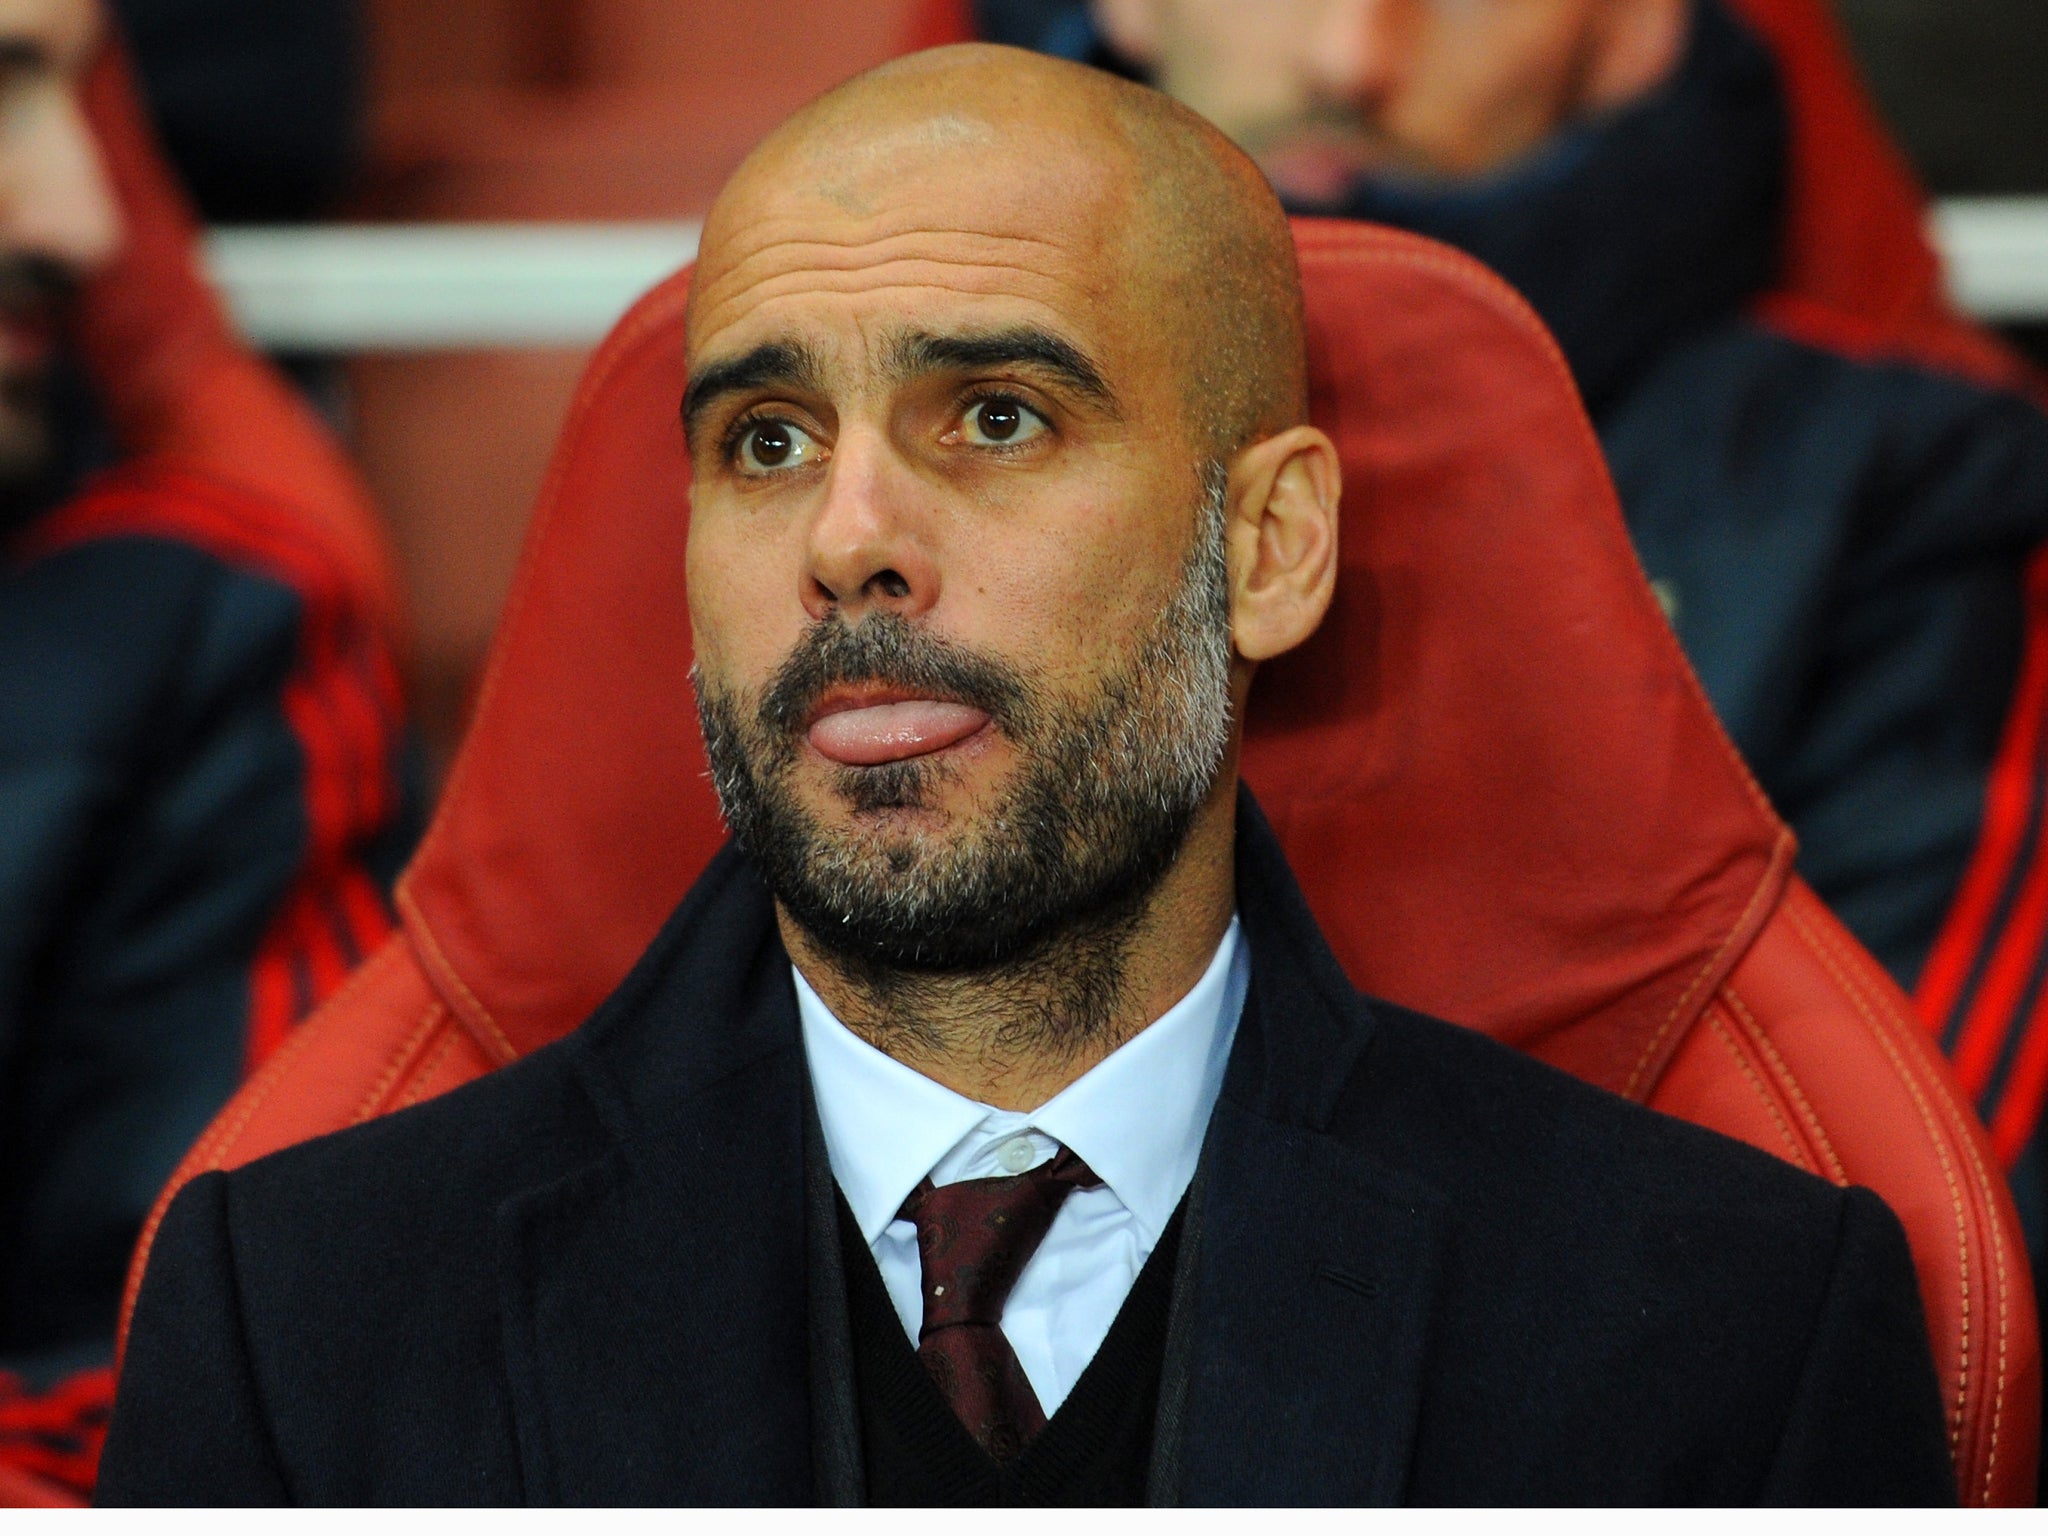 Bayern Munich coach Pep Guardiola looks on from the dugout